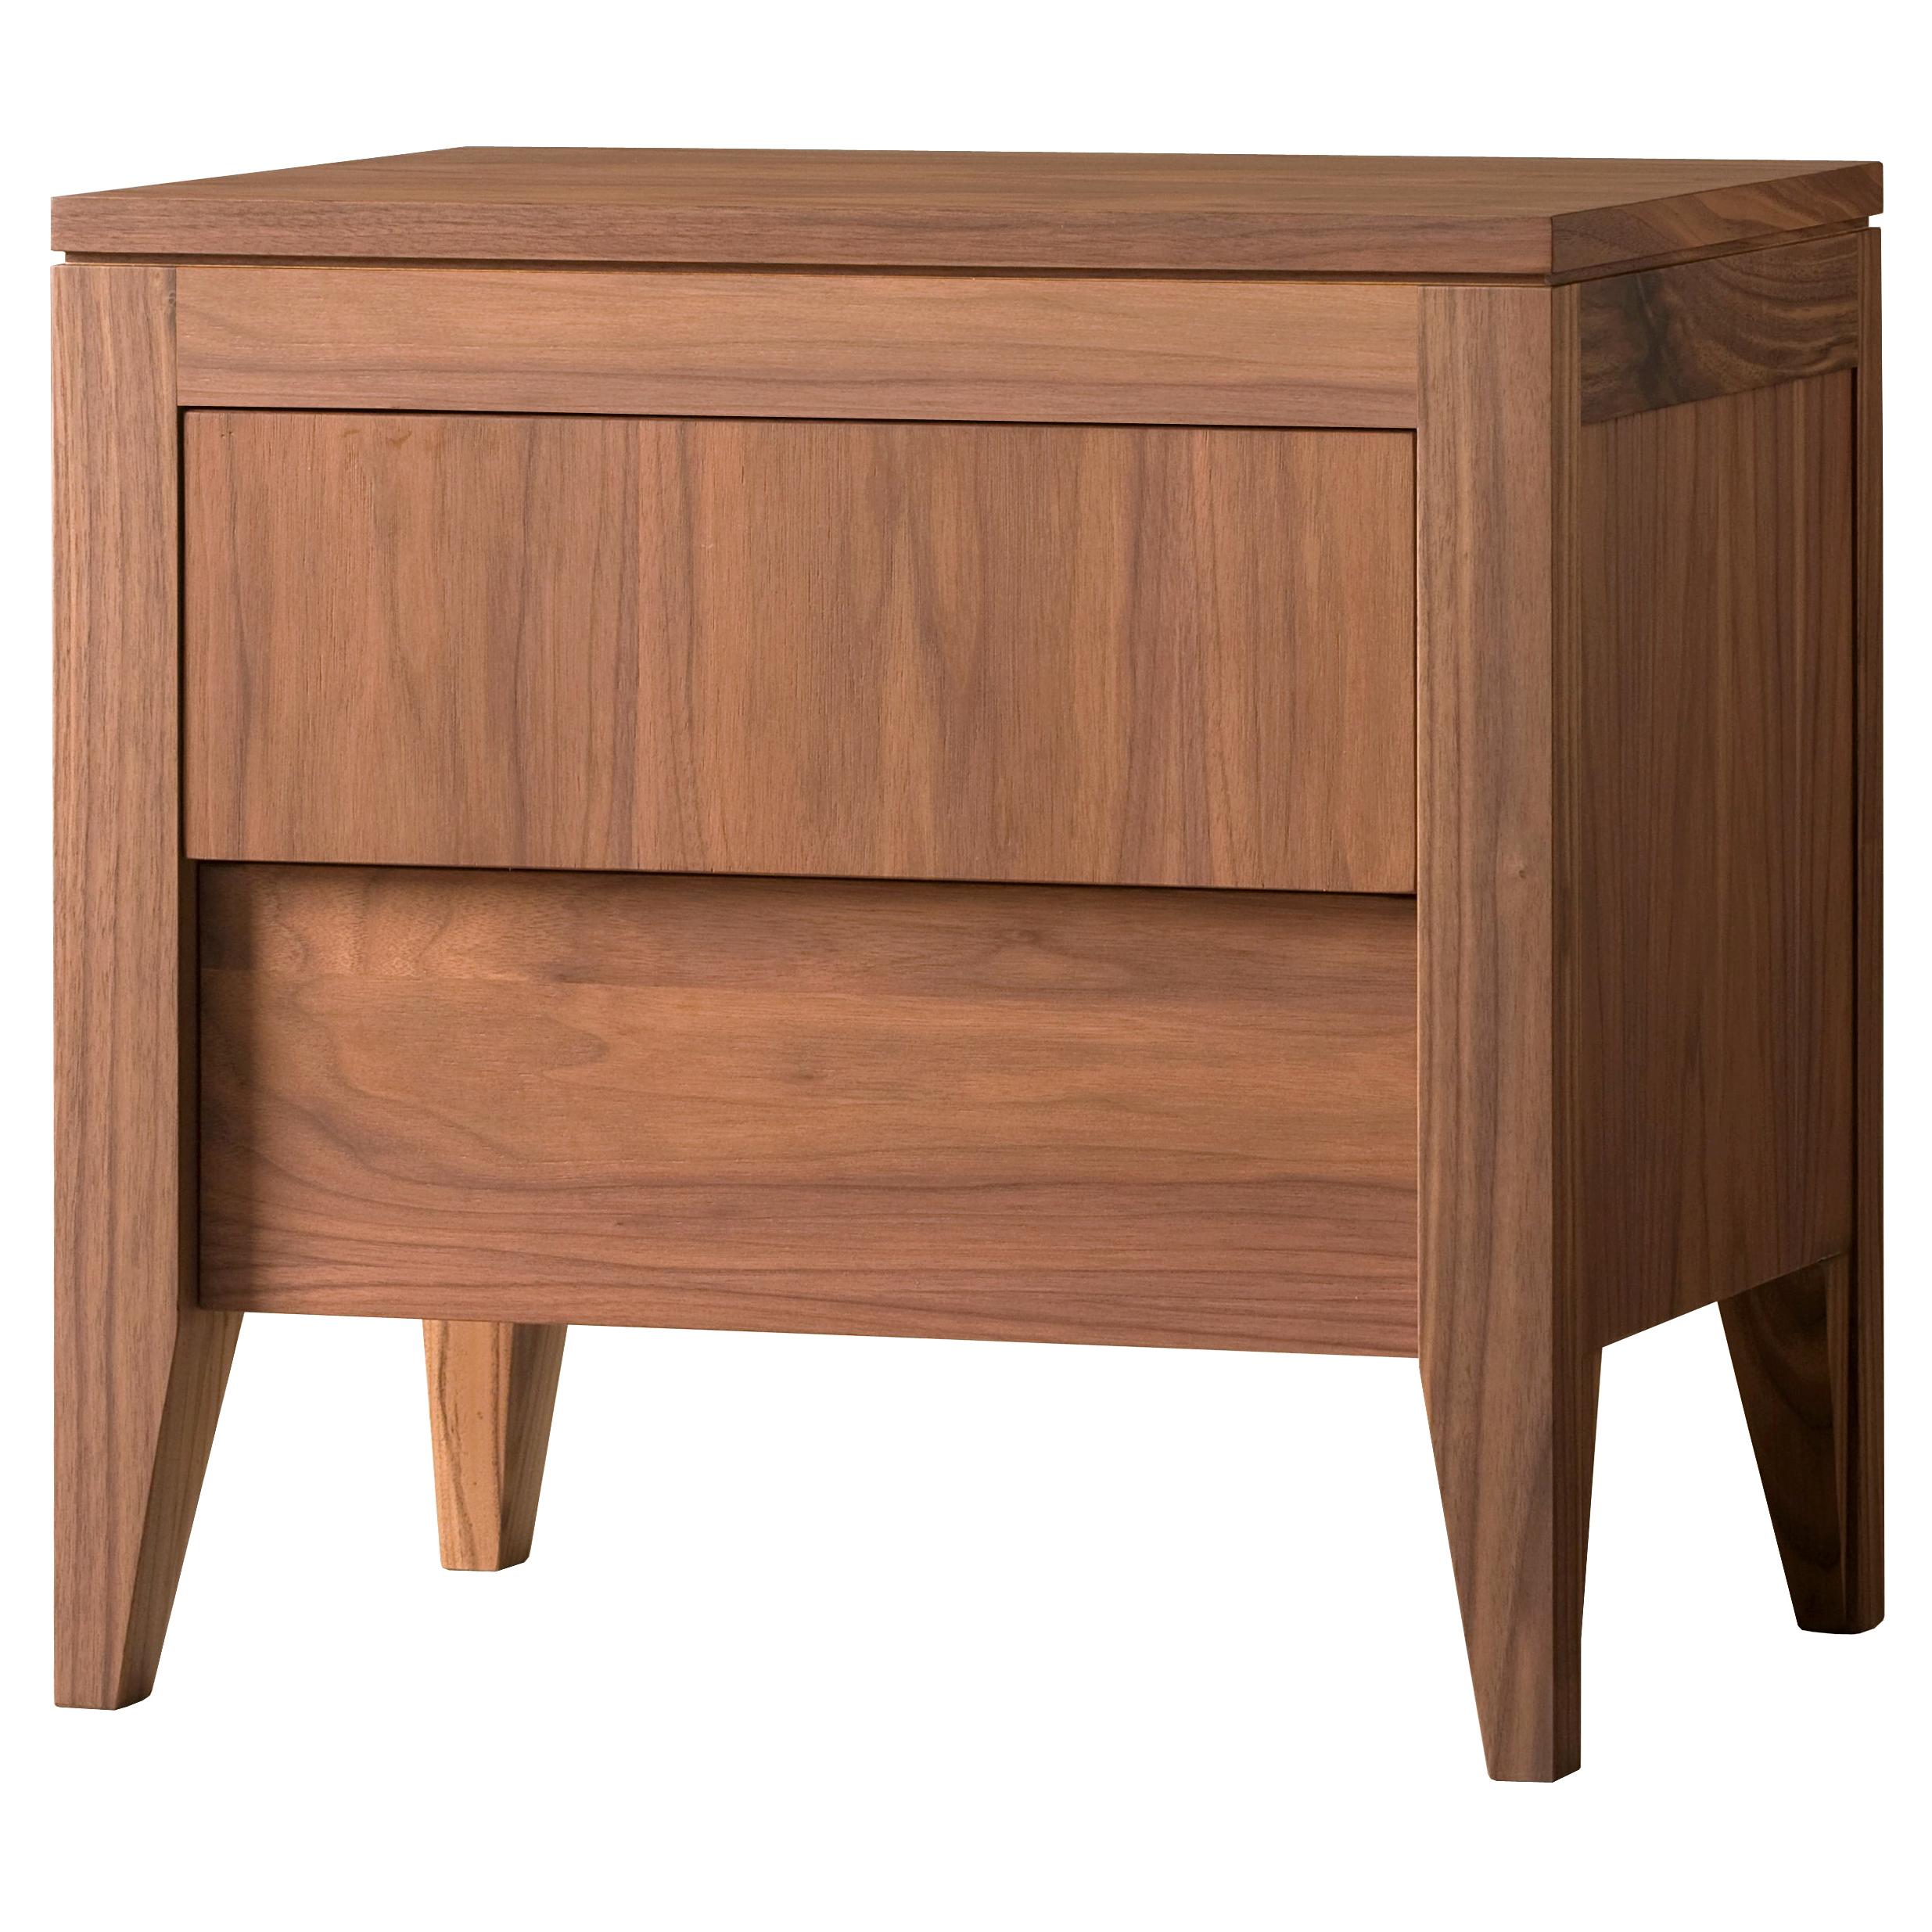 Anerio Bedside Table, Made of Canaletto Walnut Wood For Sale